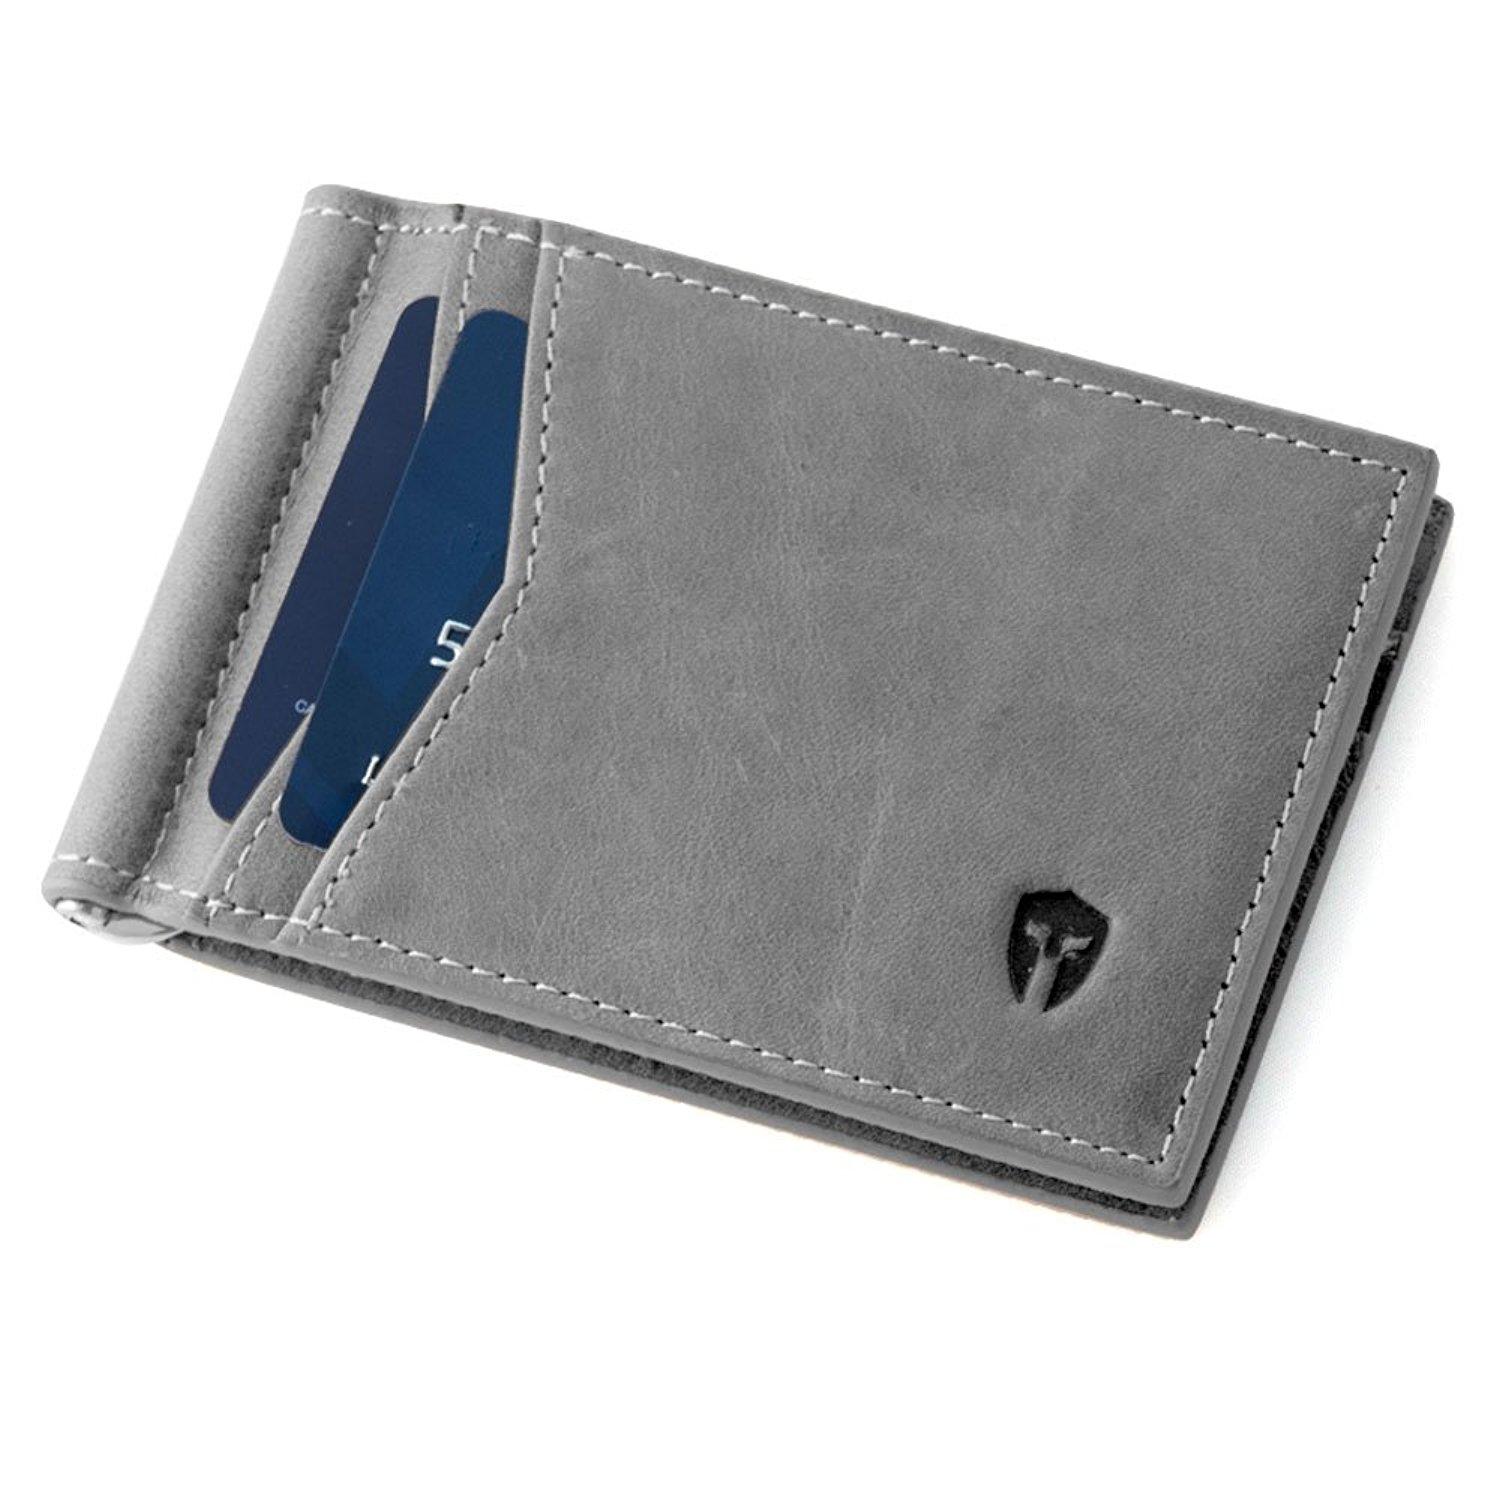 Mens Money Clip Wallet Near Meaning | IUCN Water